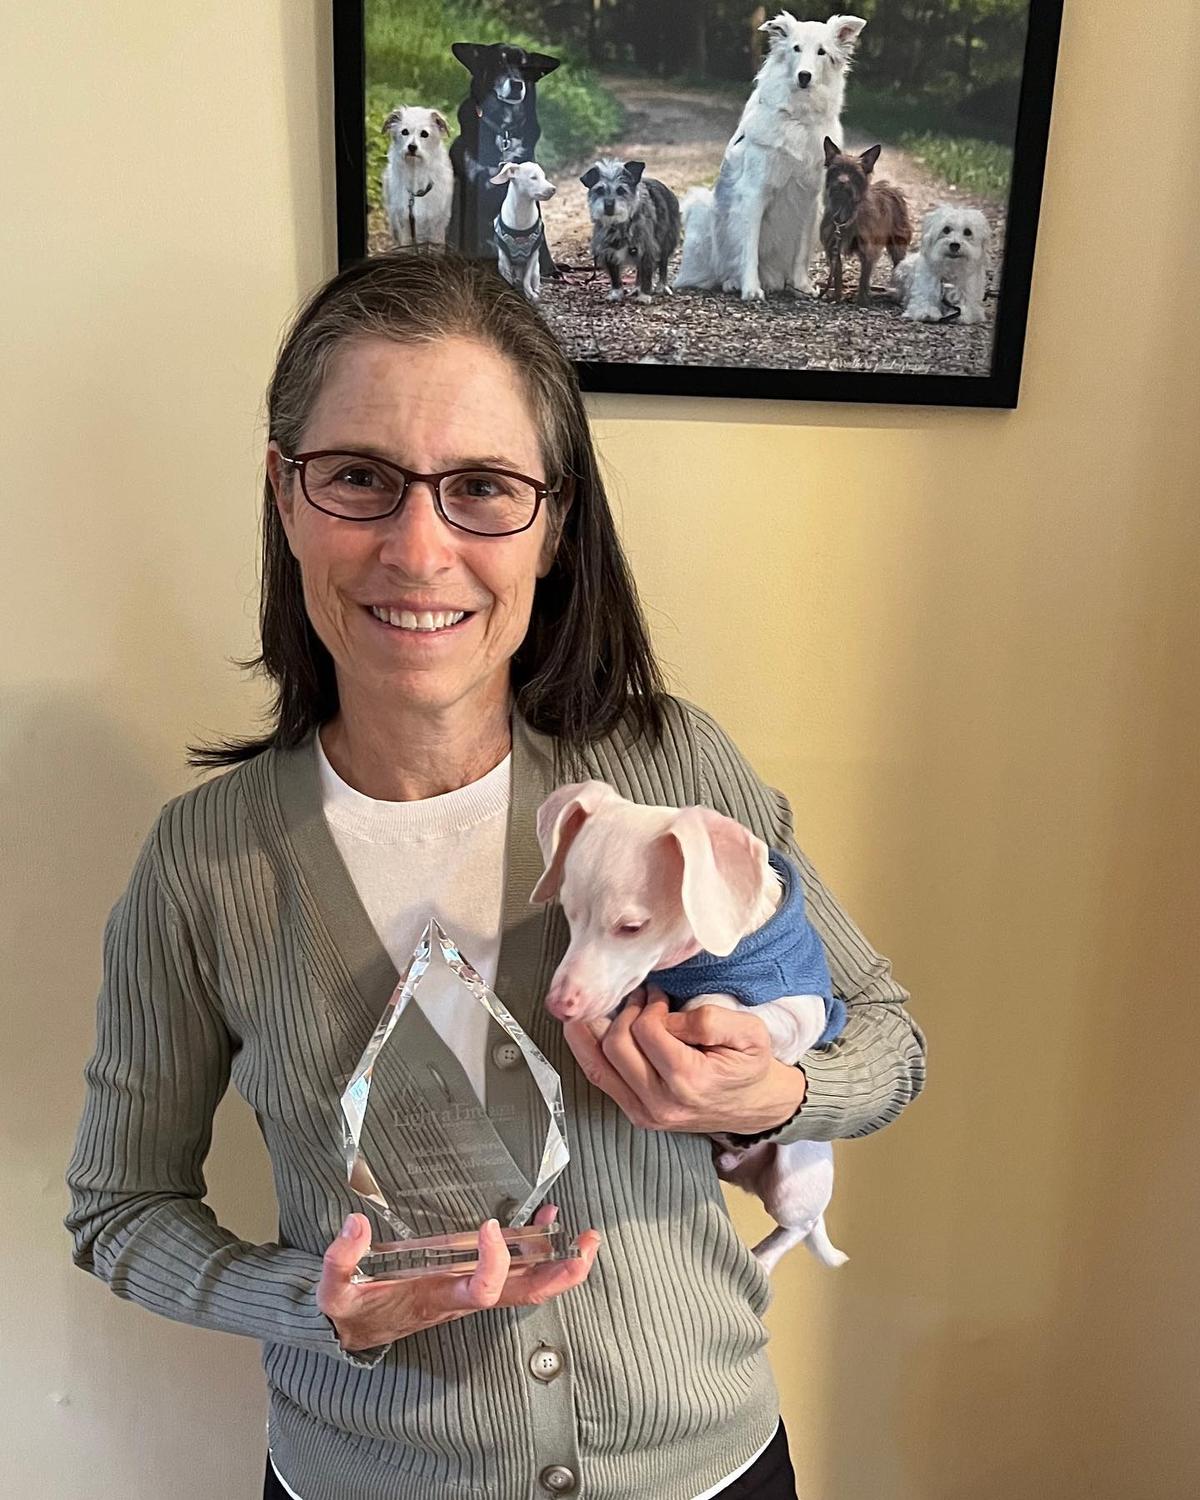 Shapiro and Piglet with Moffly Media’s 2021 Light a Fire Empathy Advocate Award. (Courtesy of <a href="https://www.instagram.com/pinkpigletpuppy/">Piglet, deaf blind pink puppy</a>)